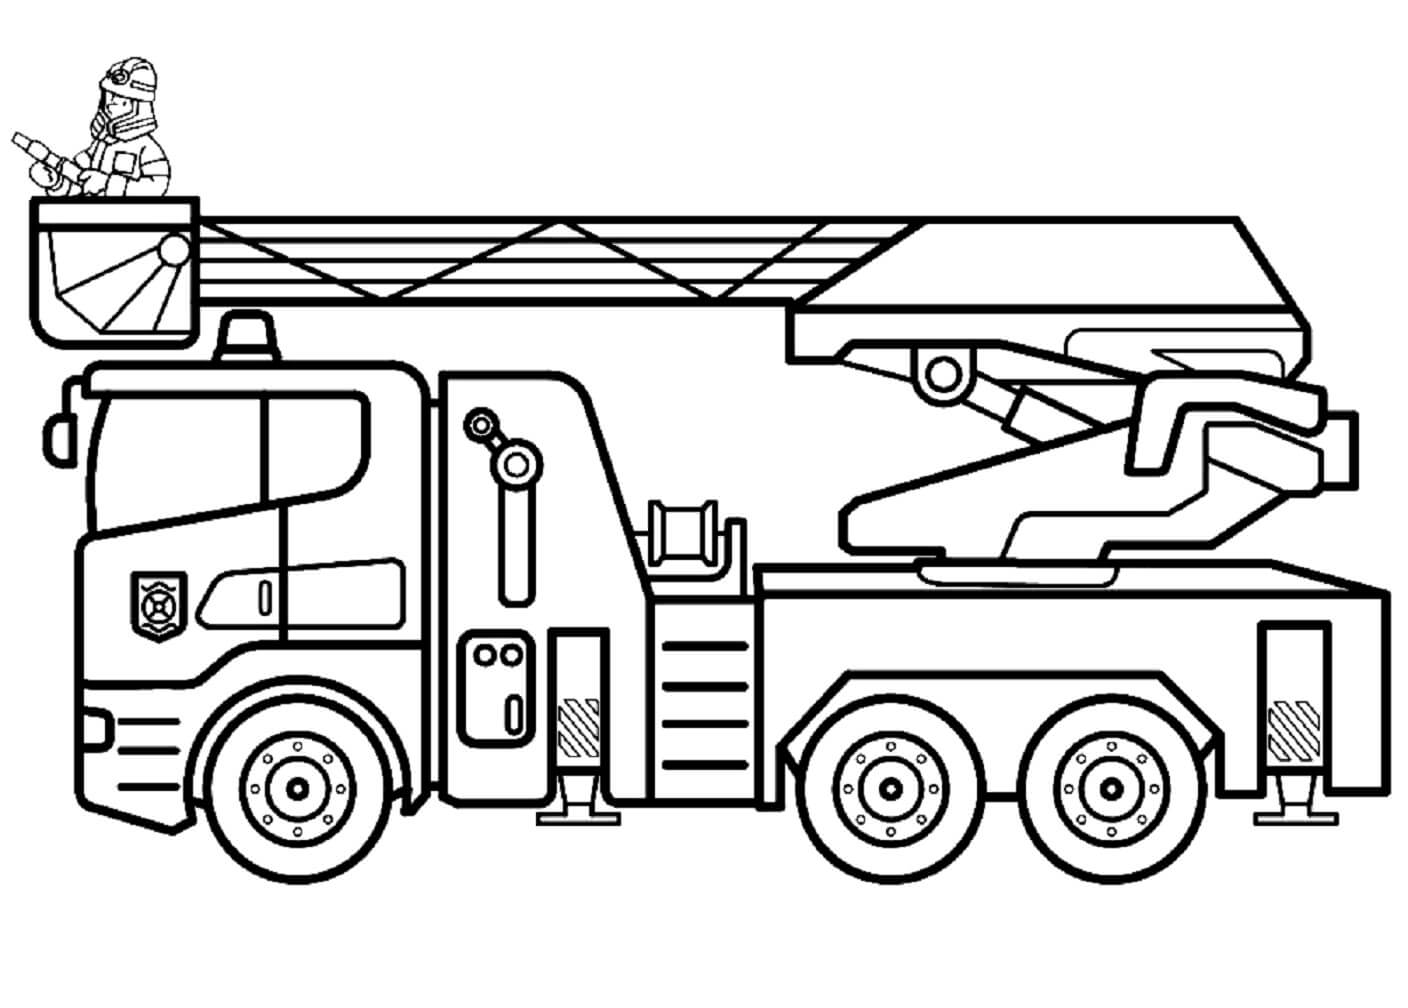 Fun fire fighting equipment coloring page